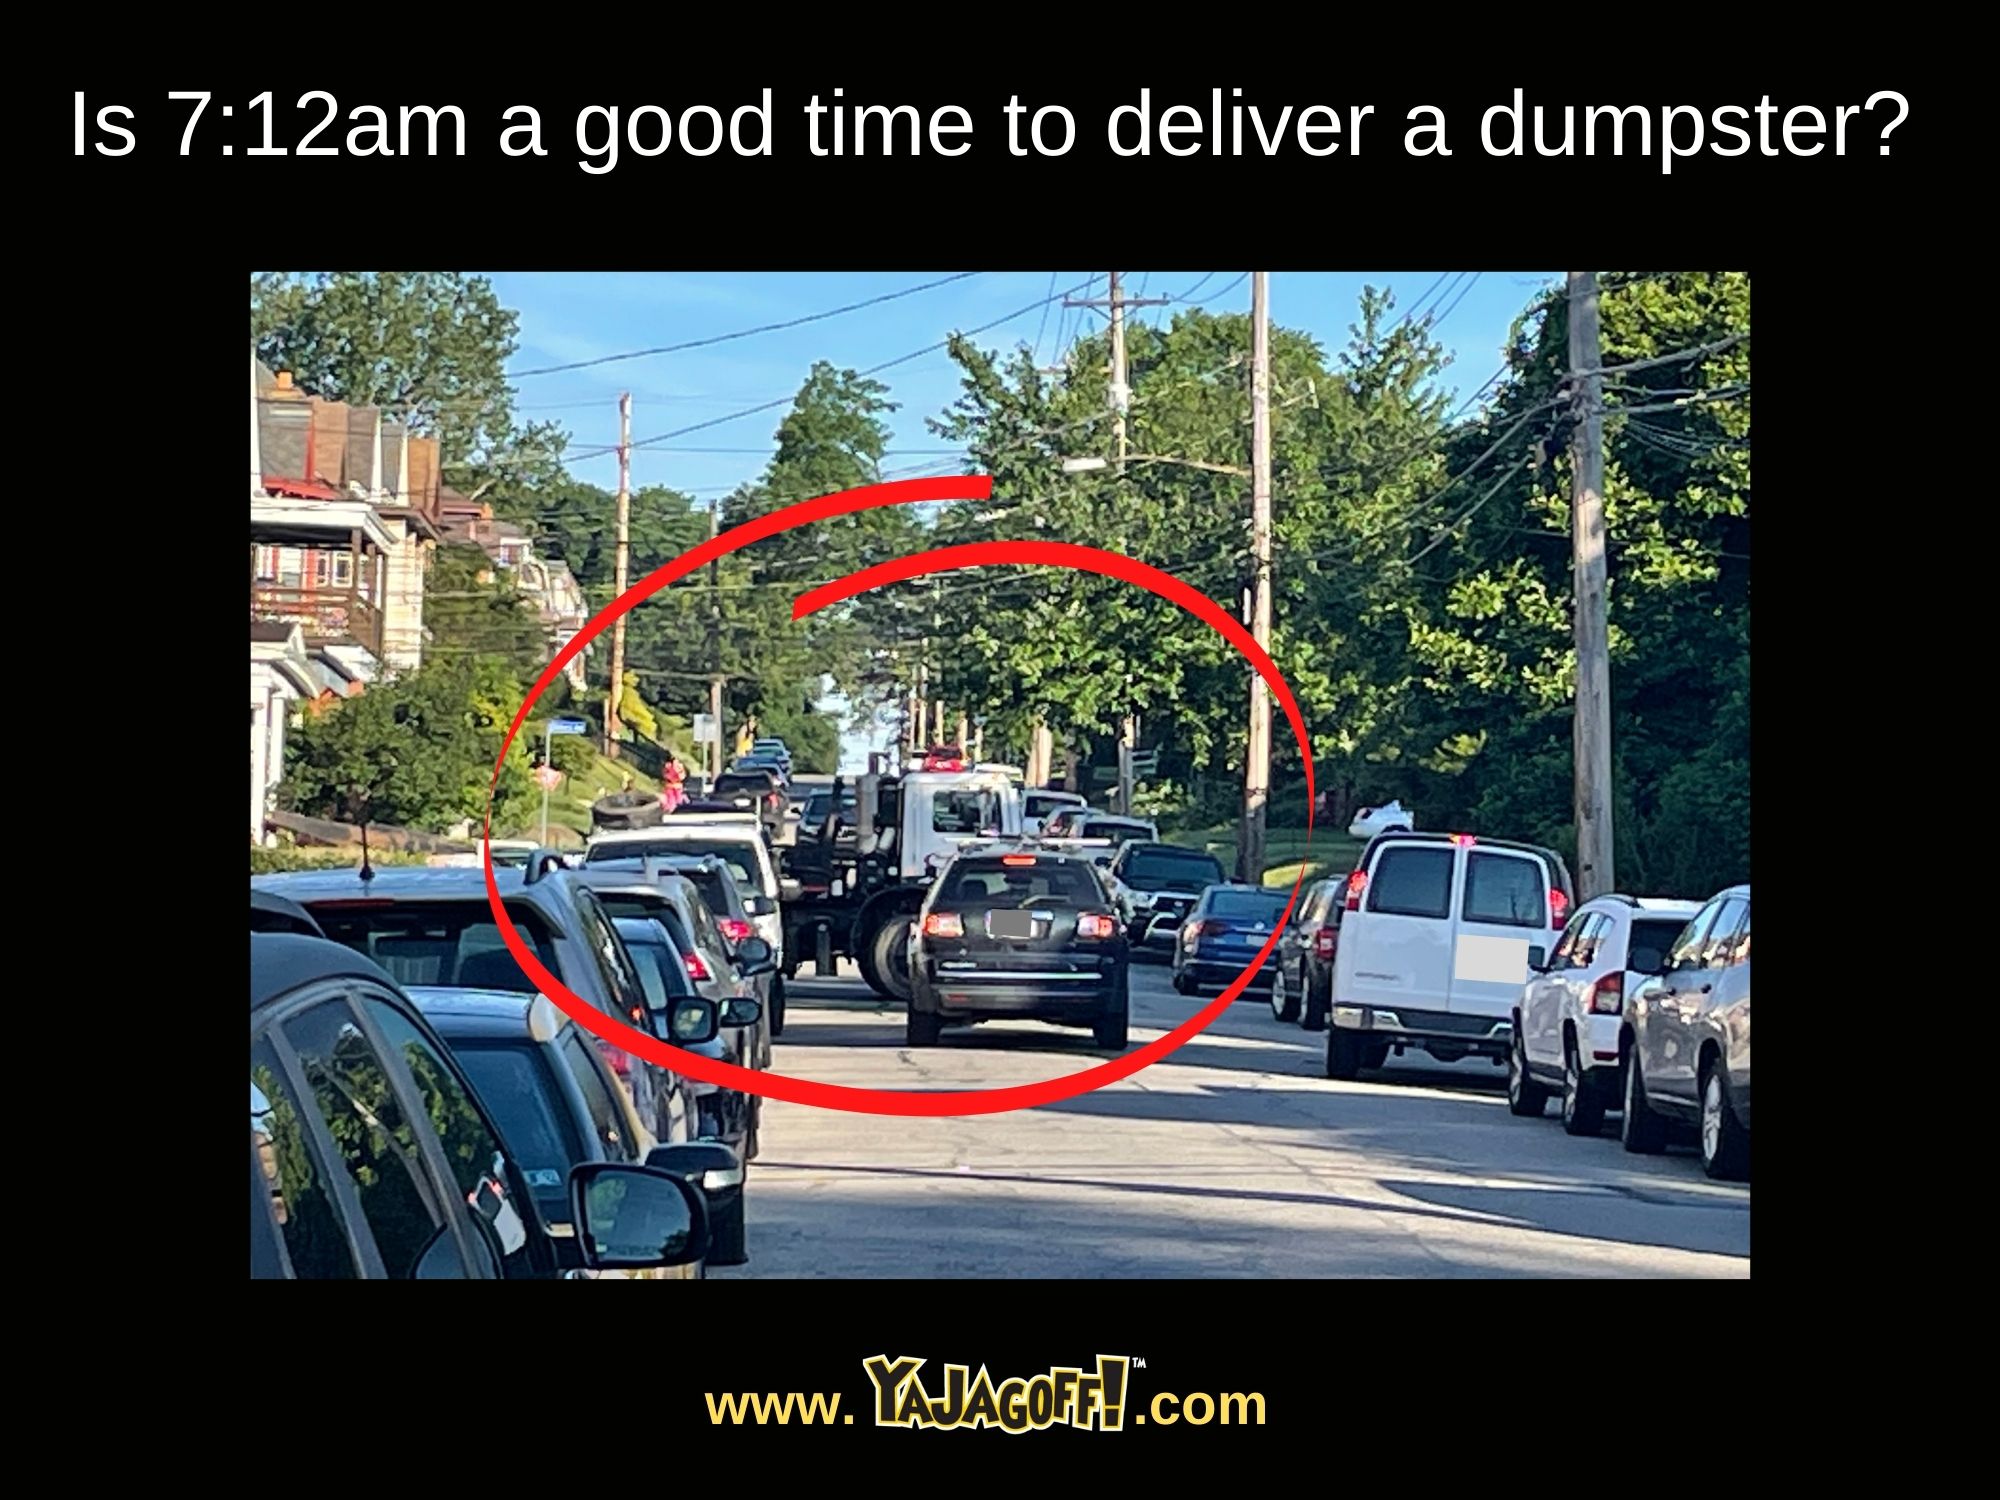 YaJagoff Podcast Dumpster Delivery